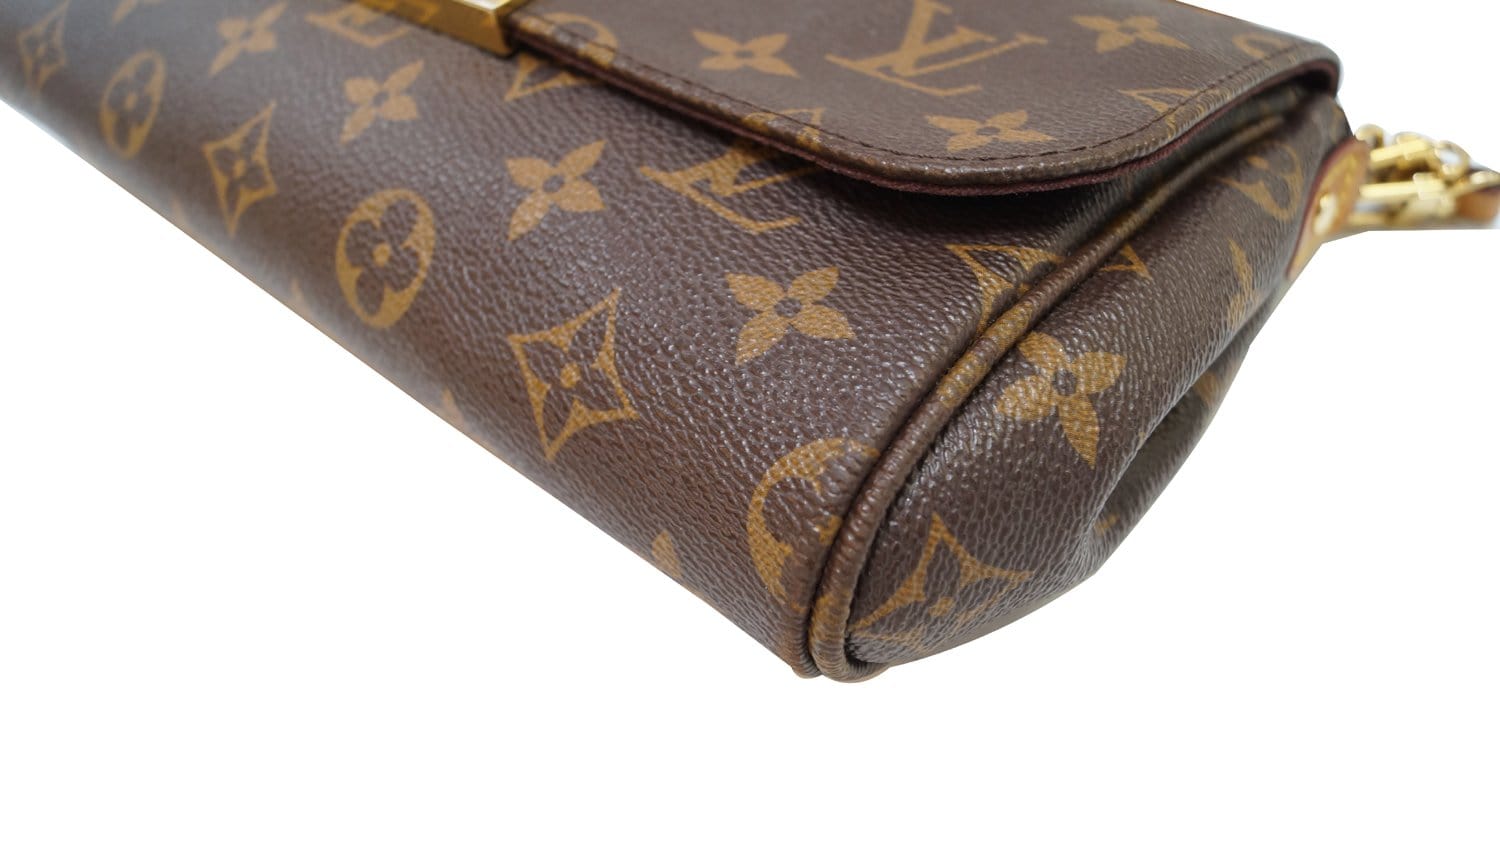 LOUIS VUITTON CROSSBODY BAG EXTRA LARGE PERFECT FOR LABTOP /BUSINESS